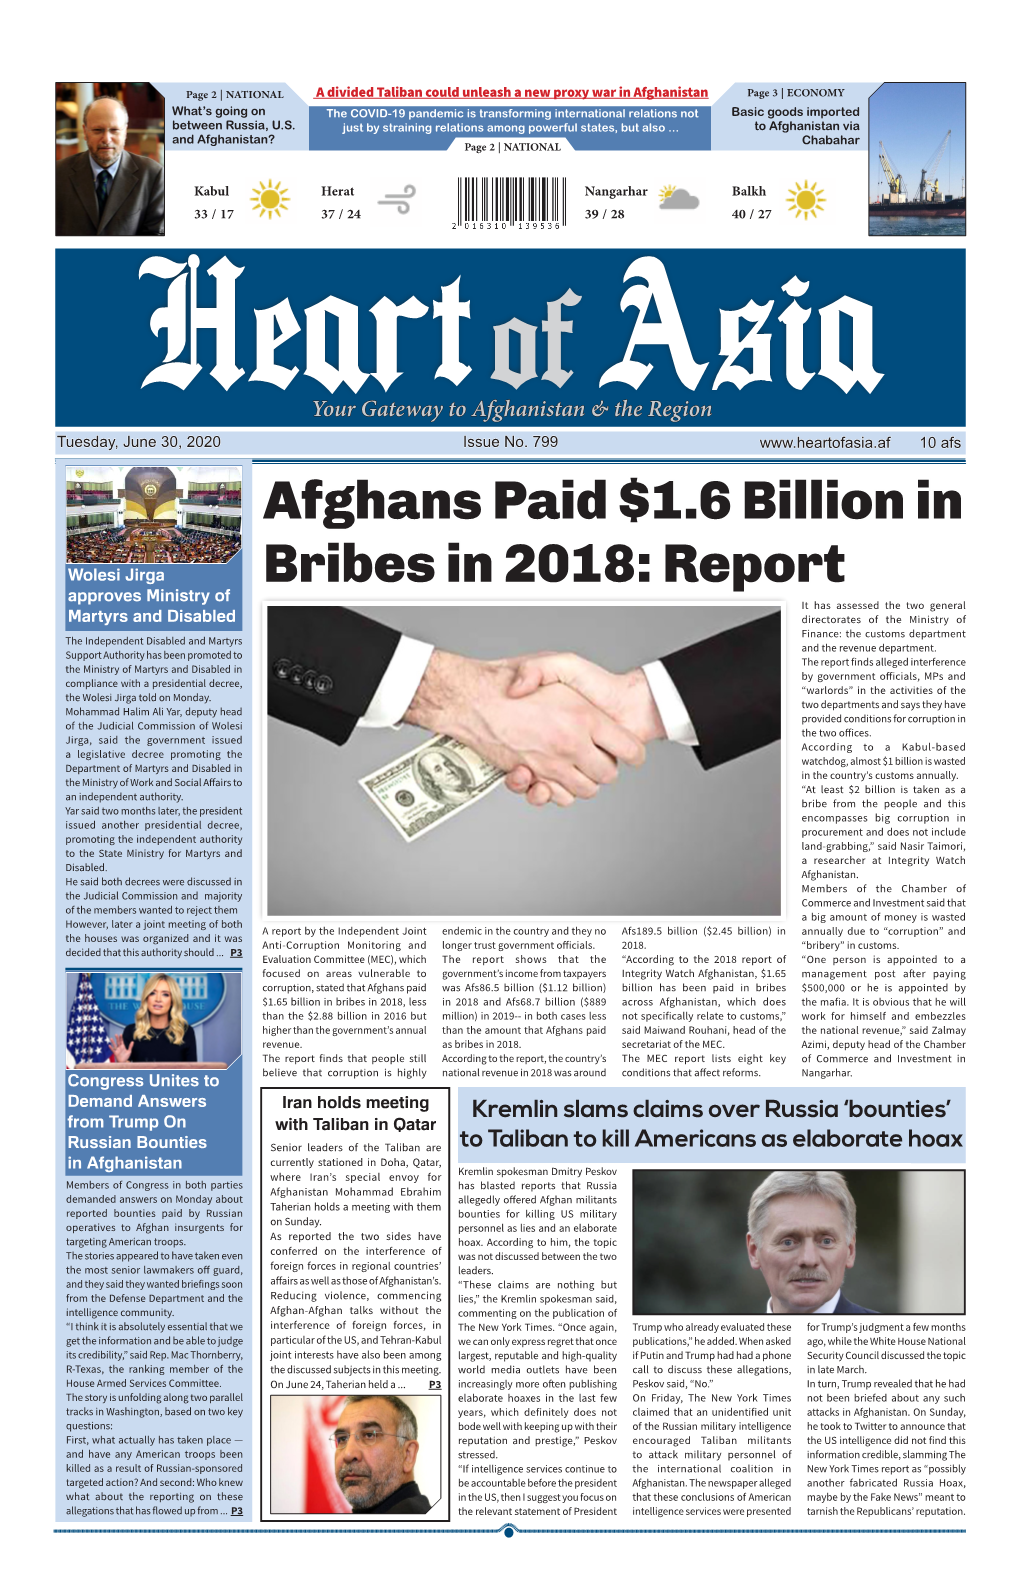 Afghans Paid $1.6 Billion in Bribes in 2018